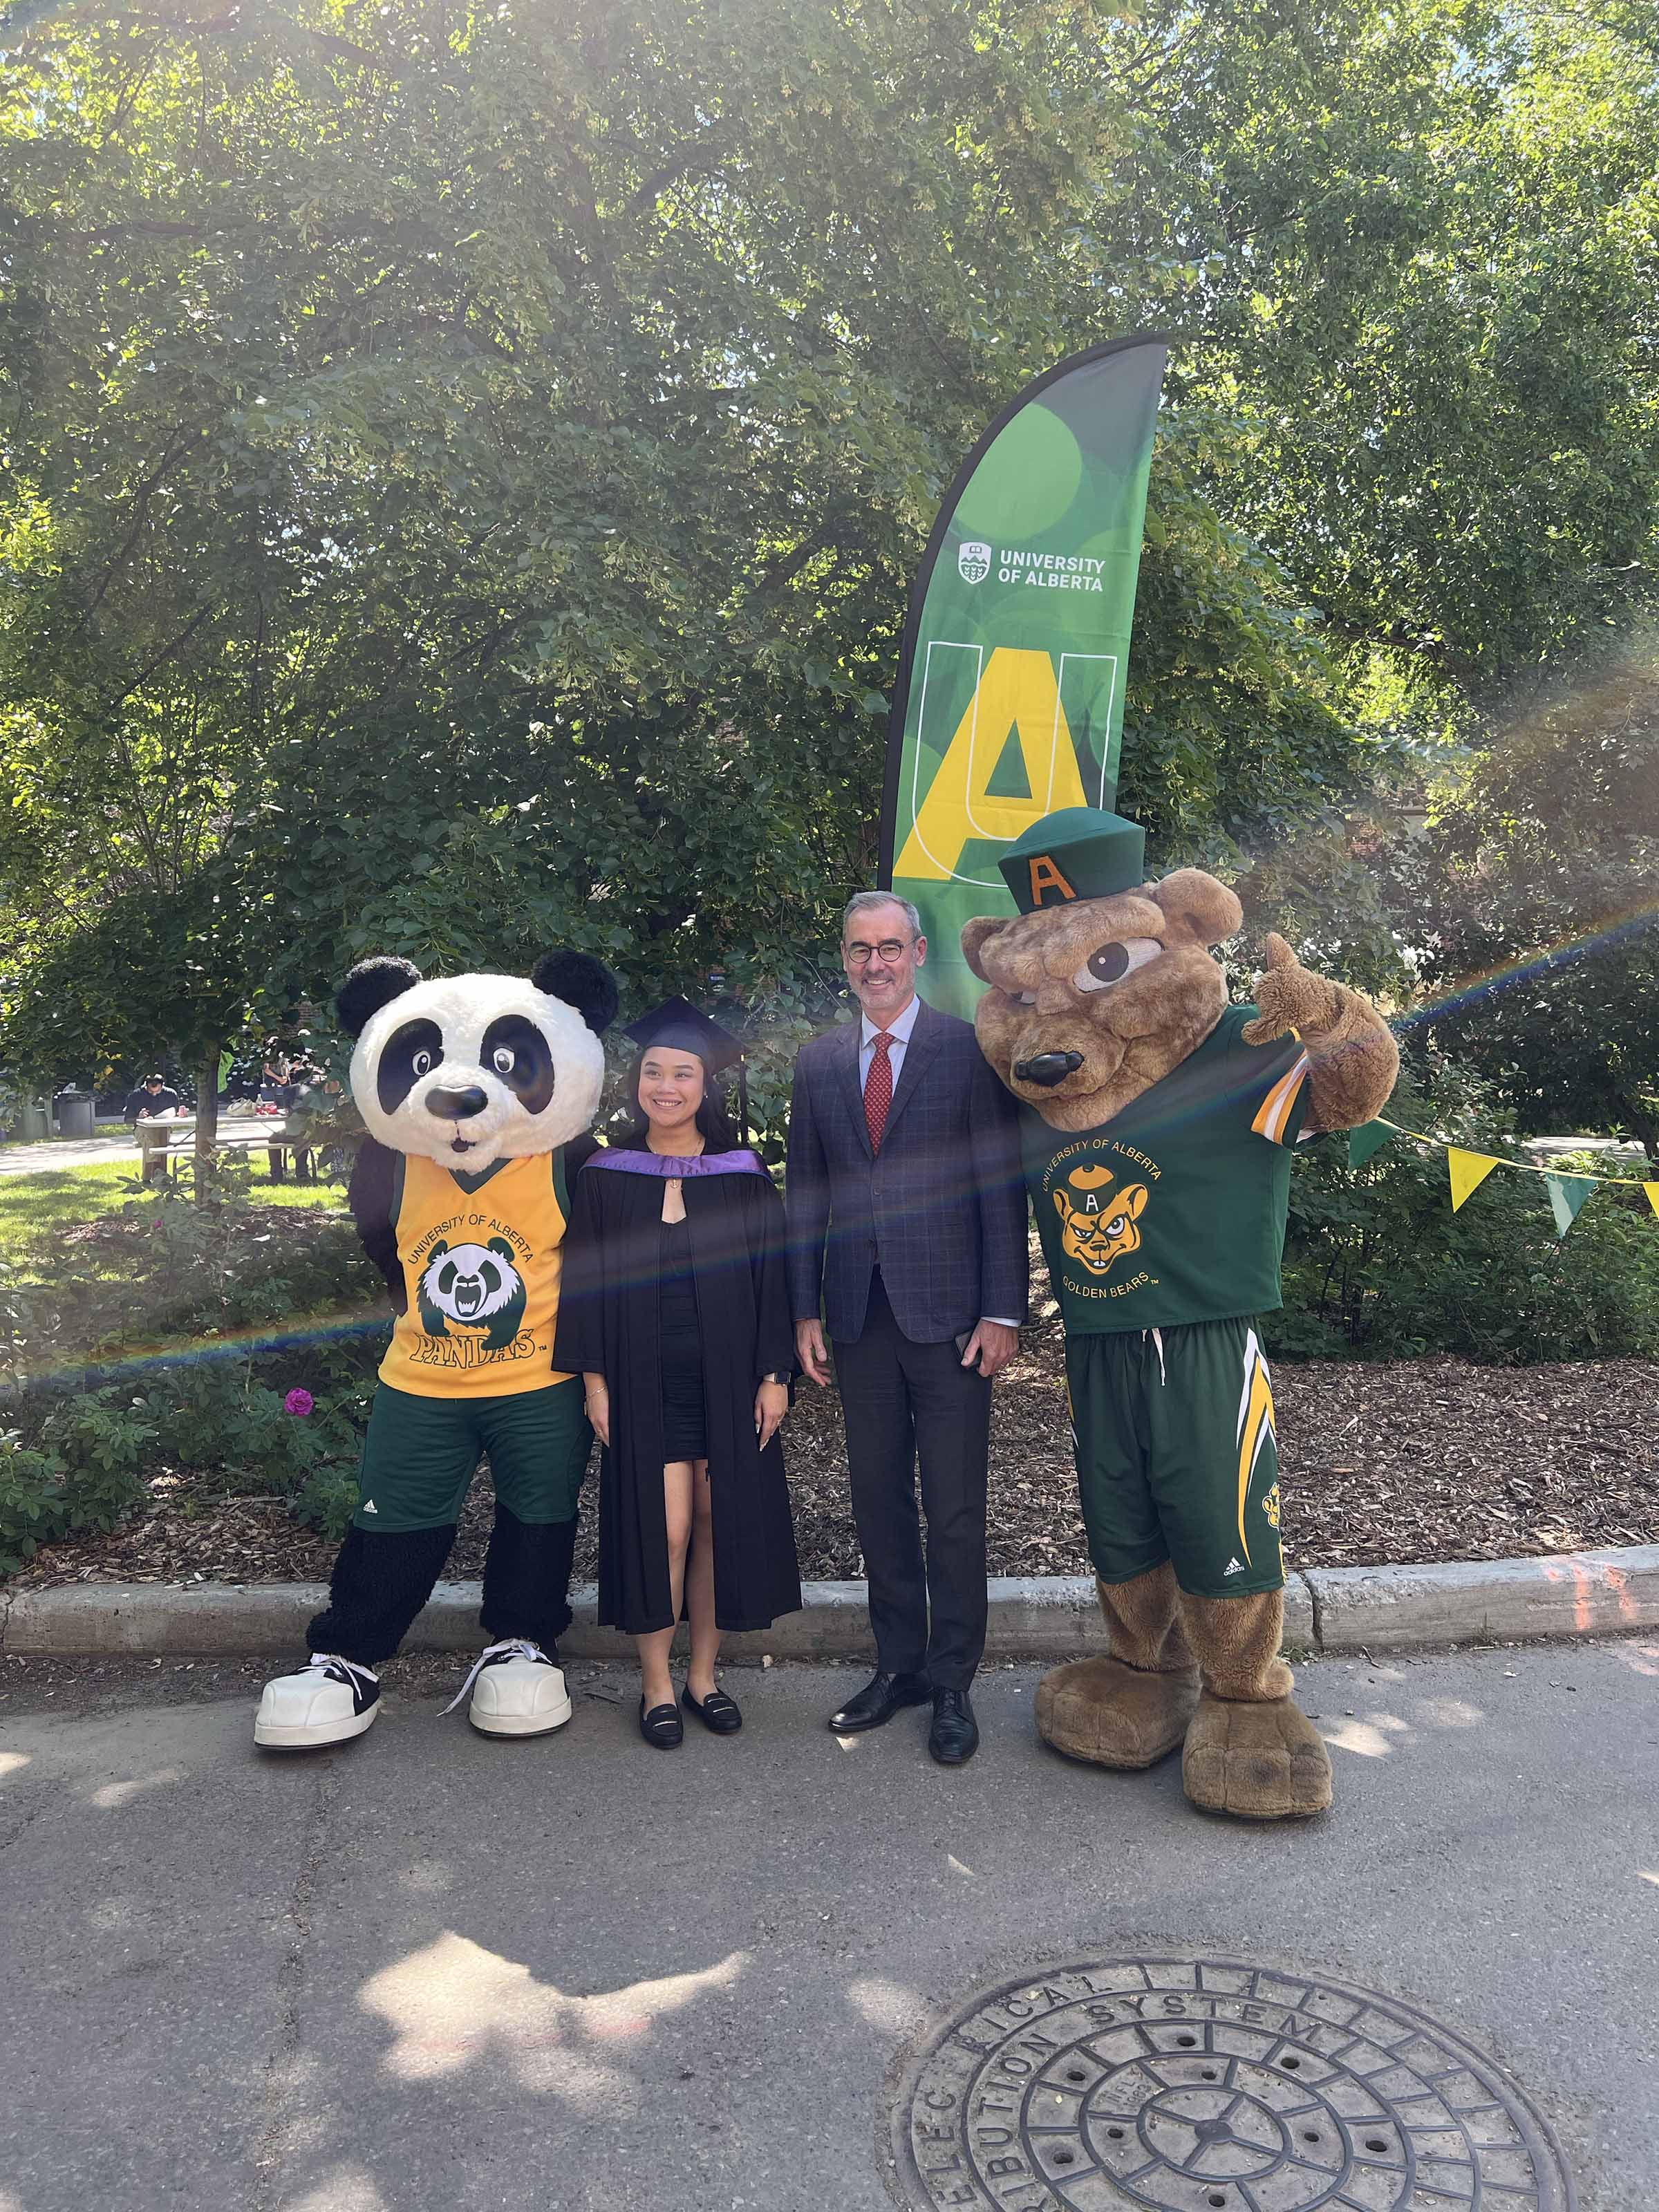 A graduate poses with President Flanagan, Patches and Guba.